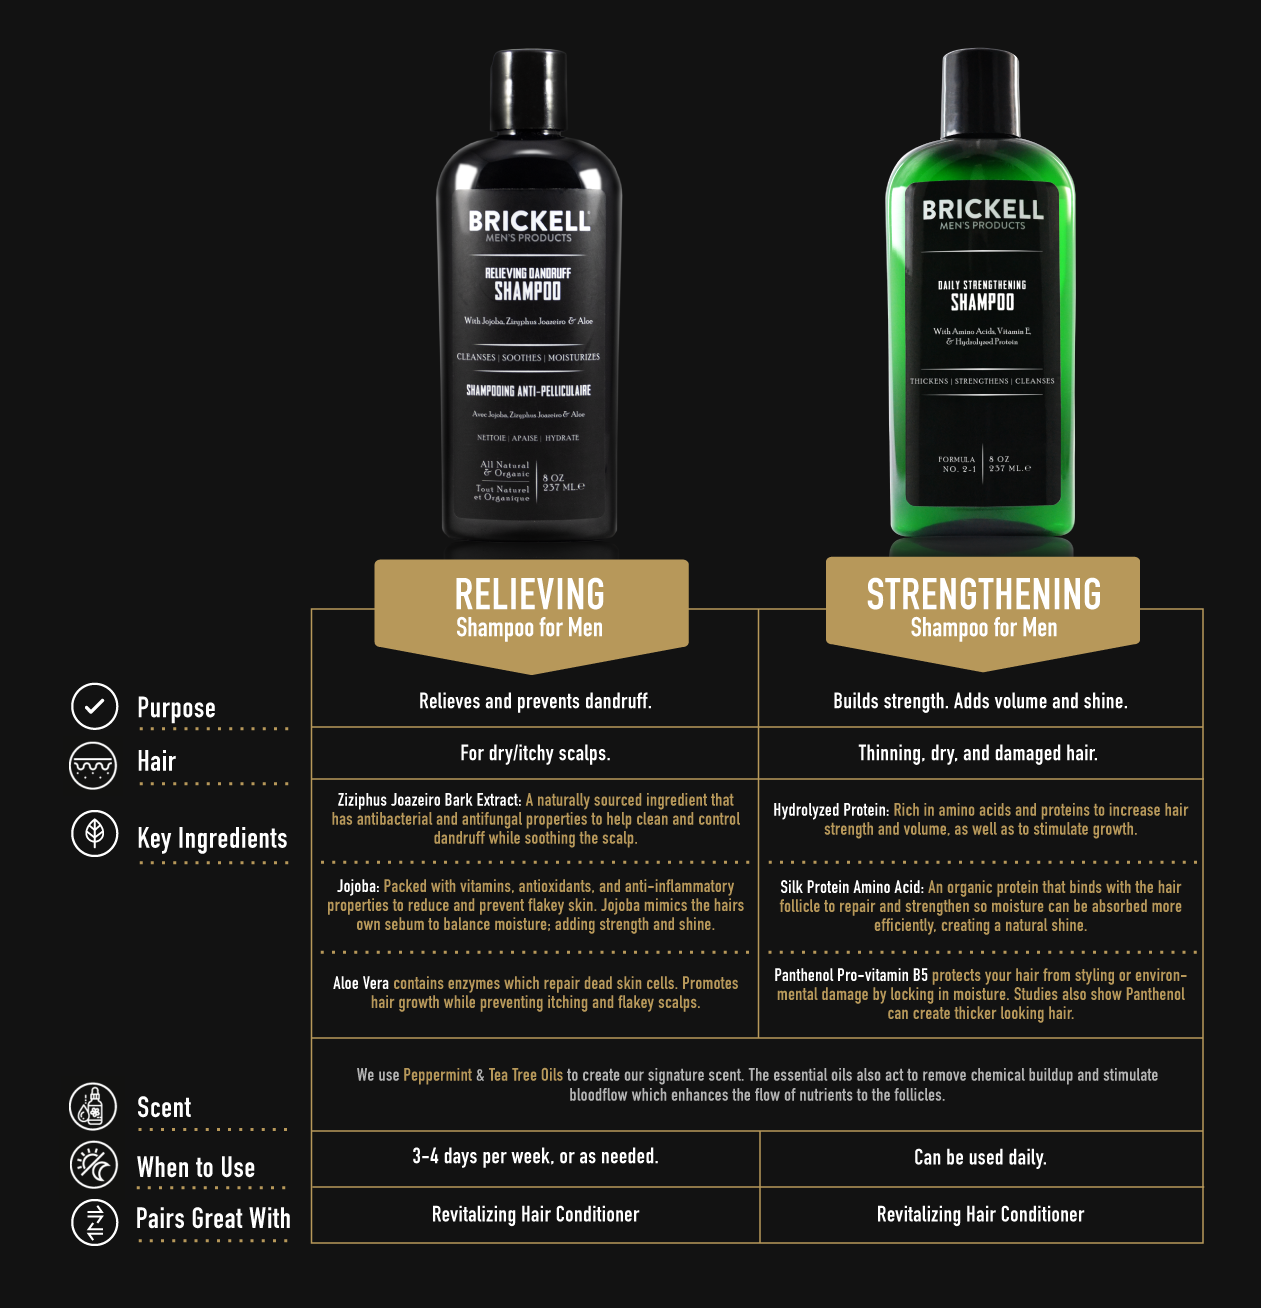 Brickell Men's Products Relieving Dandruff Shampoo, Shampoo Comparisons, Compare Shampoo for men, Healthy Hair Men, Top rated shampoo, Flakey, Itchy, Shampoo, Conditioner